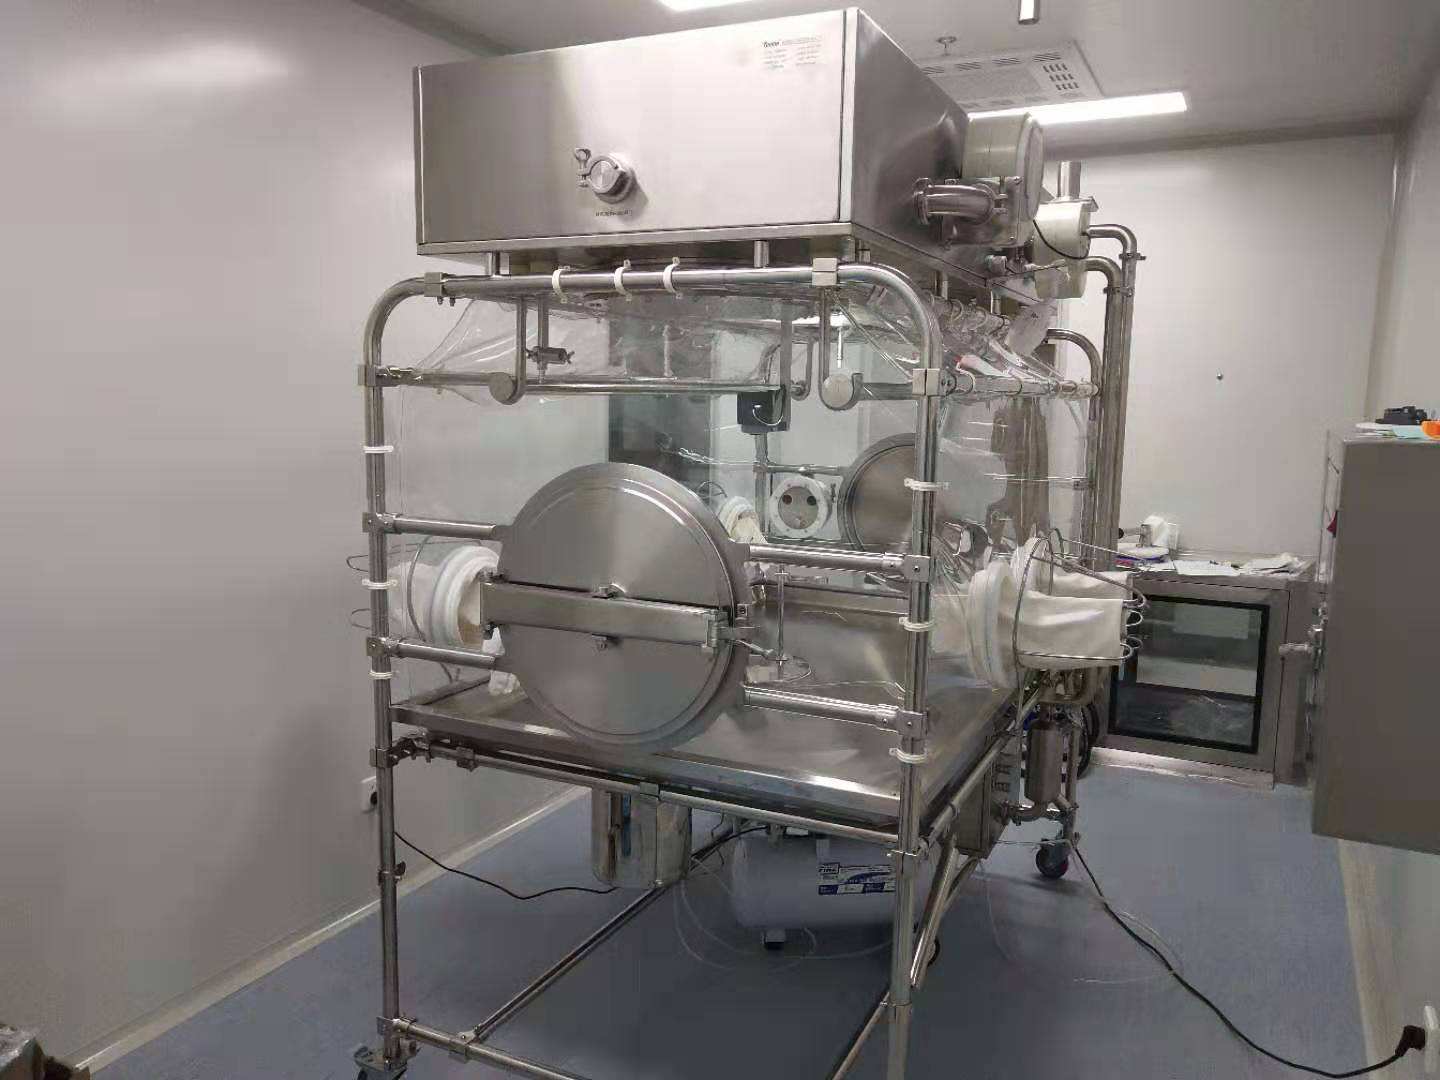 TOONE Aseptic Isolator Sterility Test containment System With PVC Soft Chamber sterile Isolator